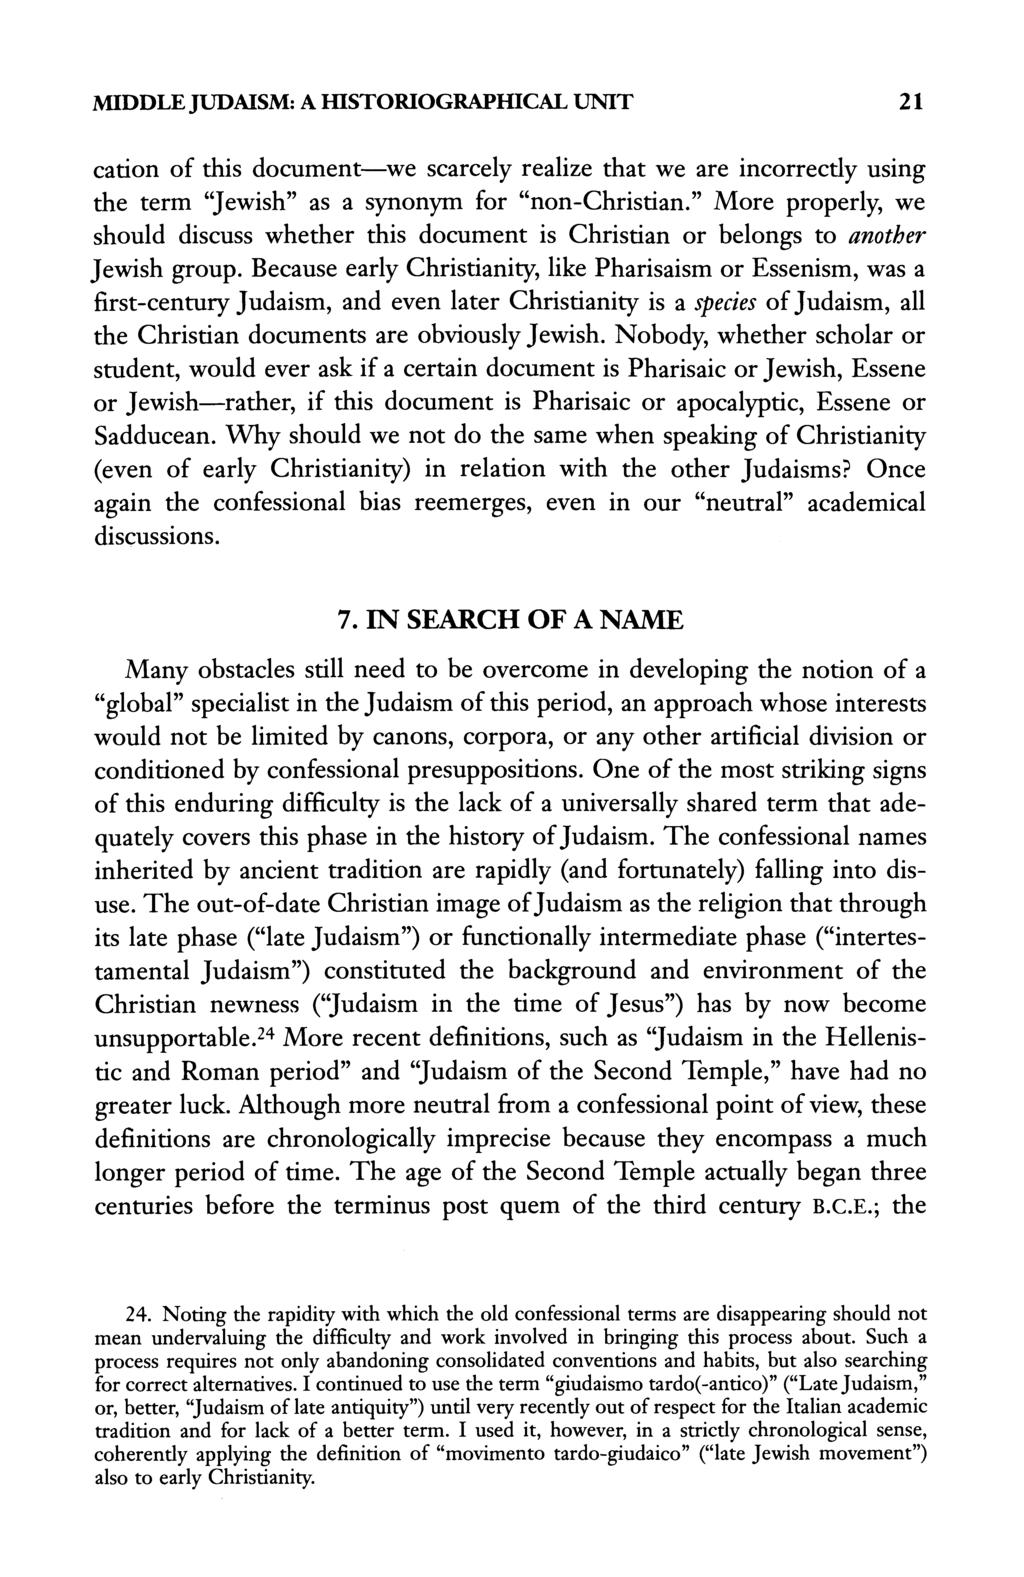 MIDDLE JUDAISM: A fflstoriographicalunit 21 cation of this document we scarcely realize that we are incorrectly using the term "Jewish" as a synonym for "non-christian.